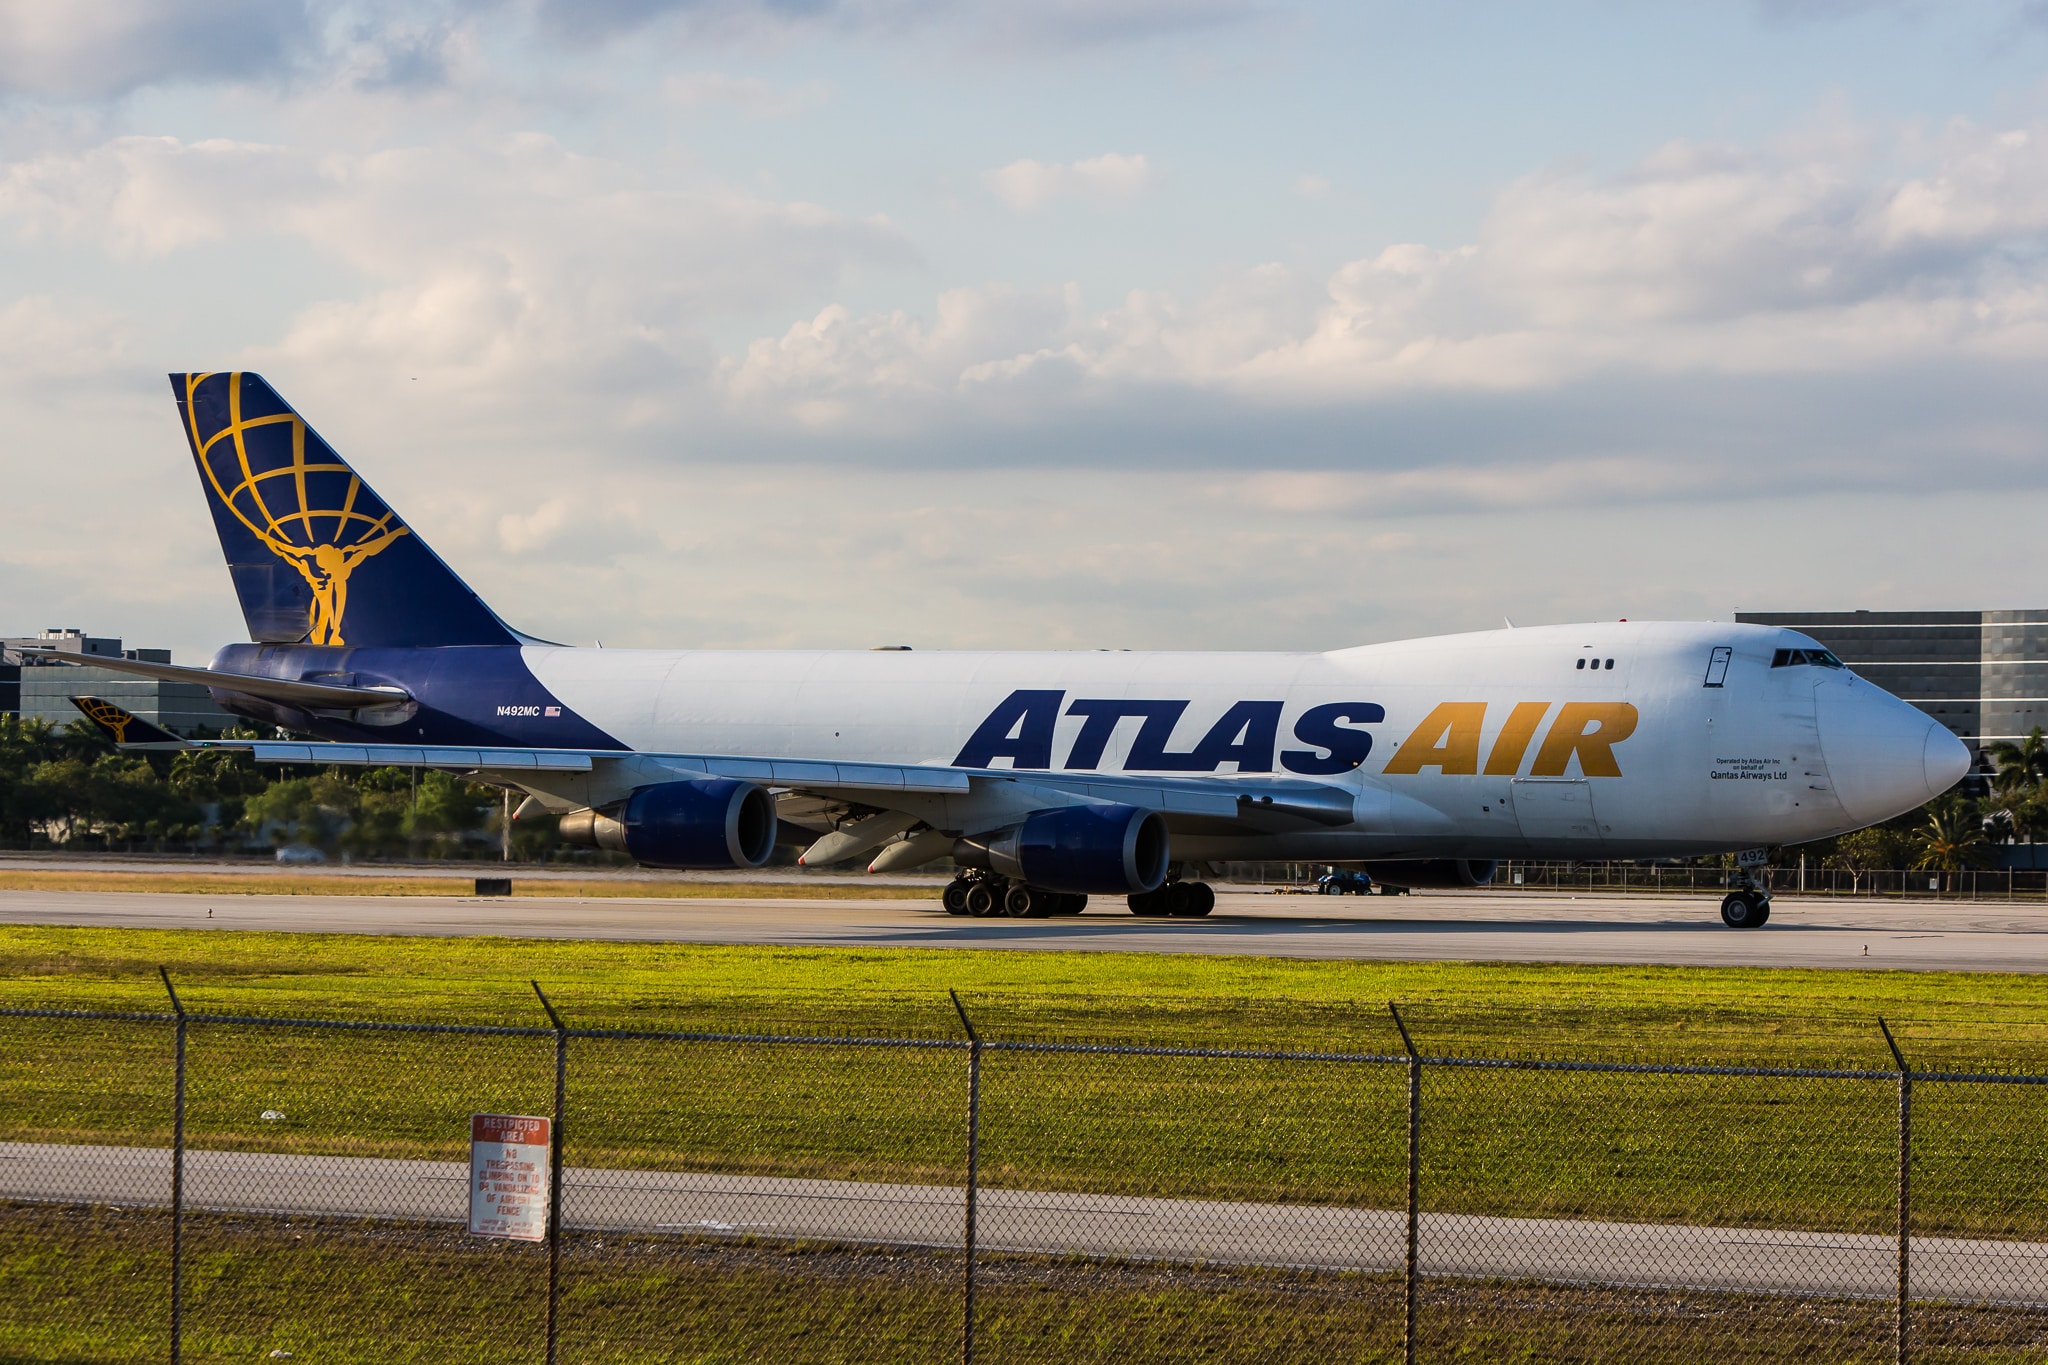 Watch Boeing and Atlas Air Celebrate the Final 747 on Jan. 31